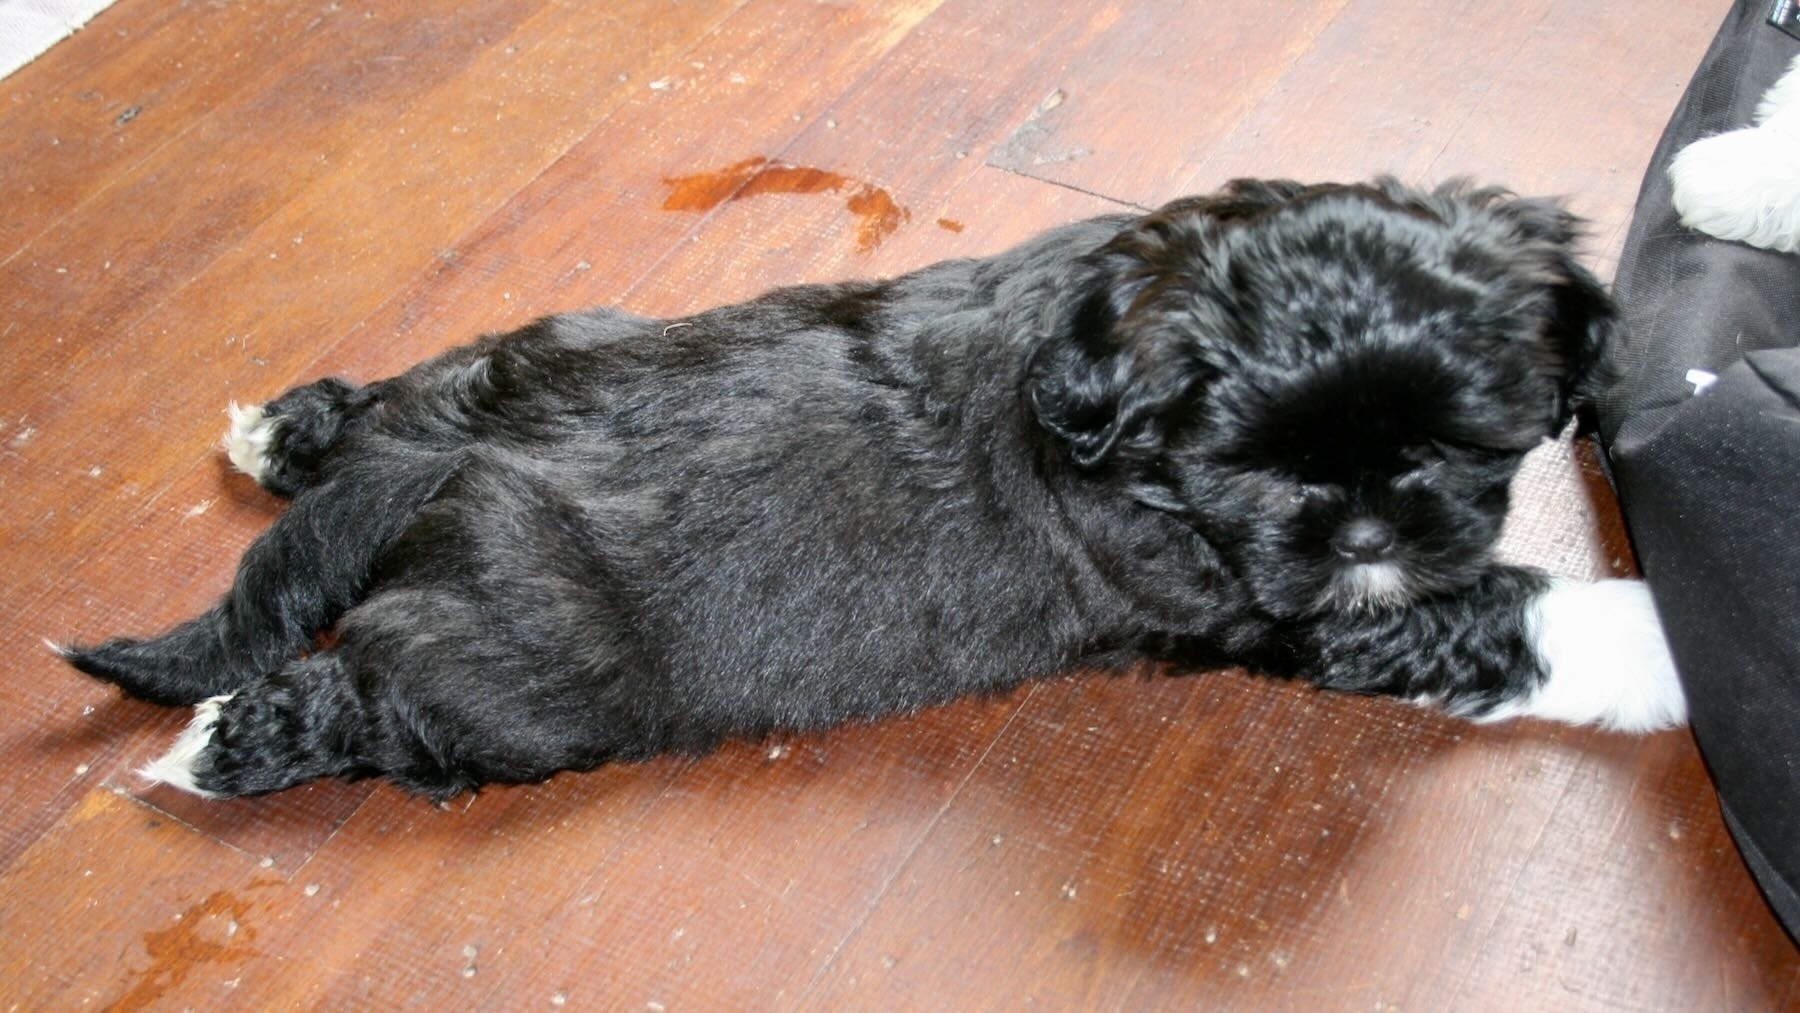 Chubby black puppy lying tummy down on a wooden floor with legs splayed.